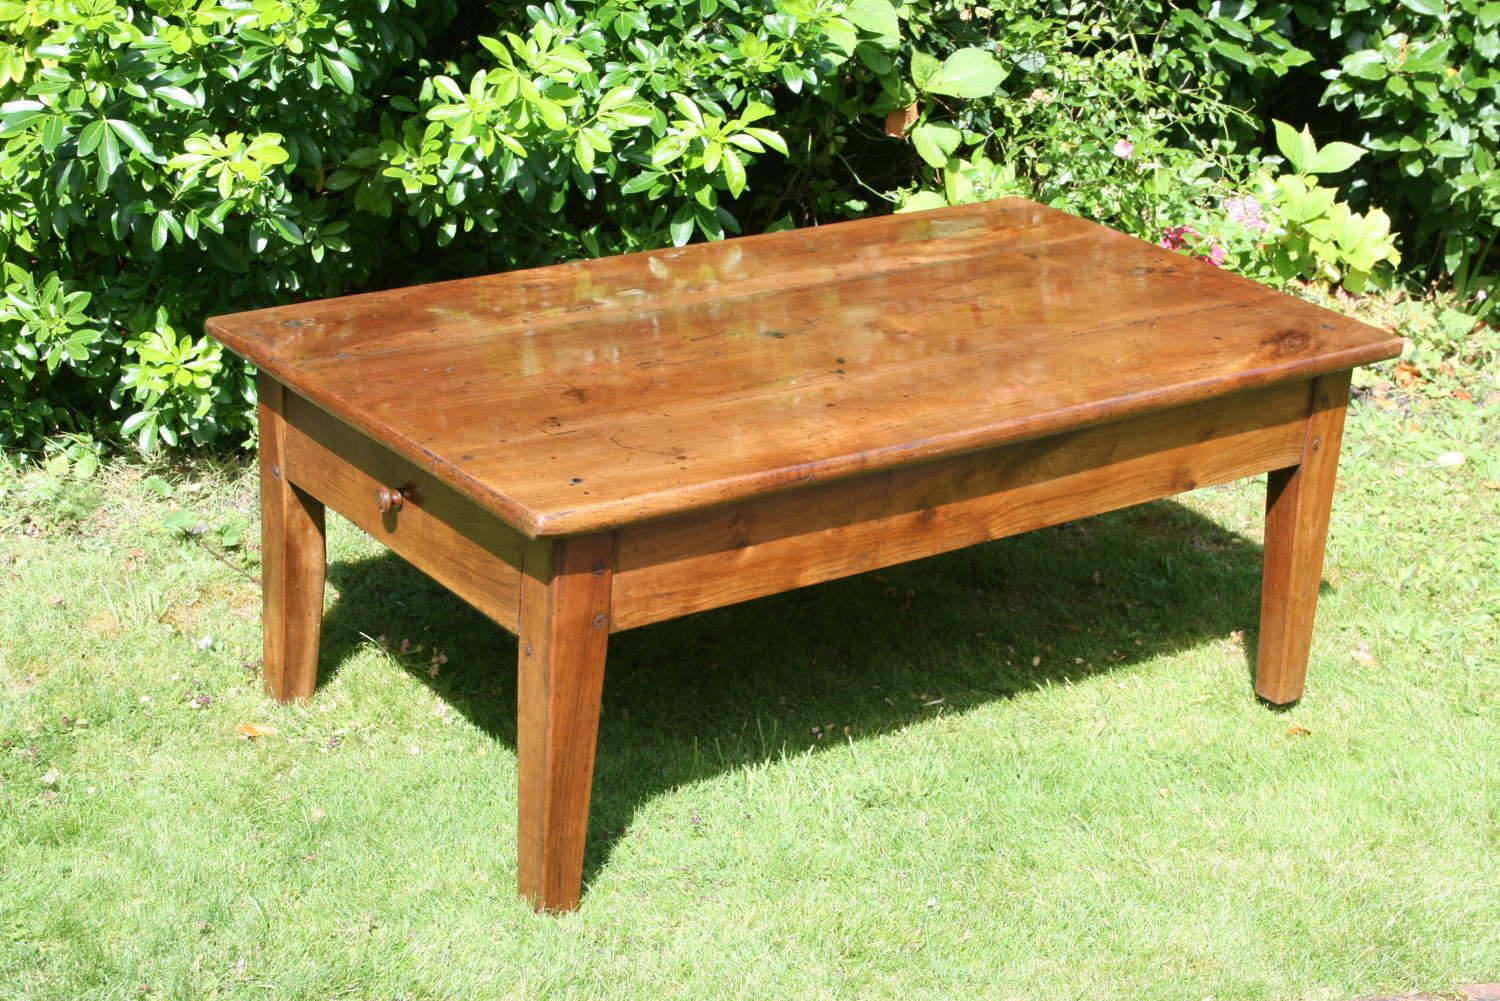 French Cherry Wood Coffee Table Intended For Heartwood Cherry Wood Coffee Tables (View 9 of 15)